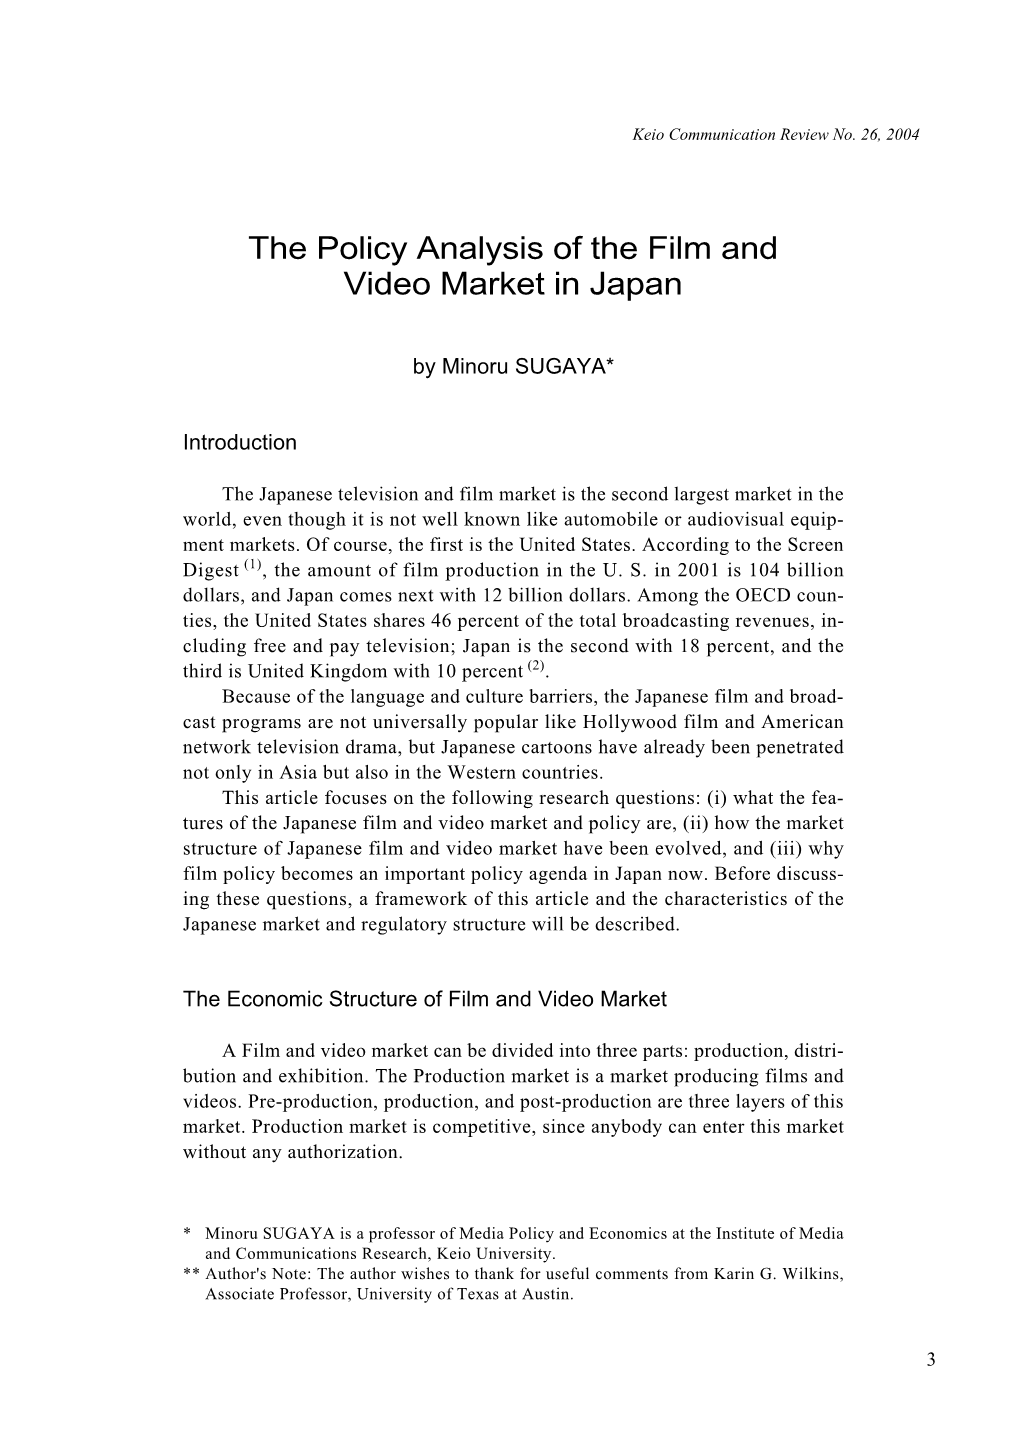 The Policy Analysis of the Film and Video Market in Japan